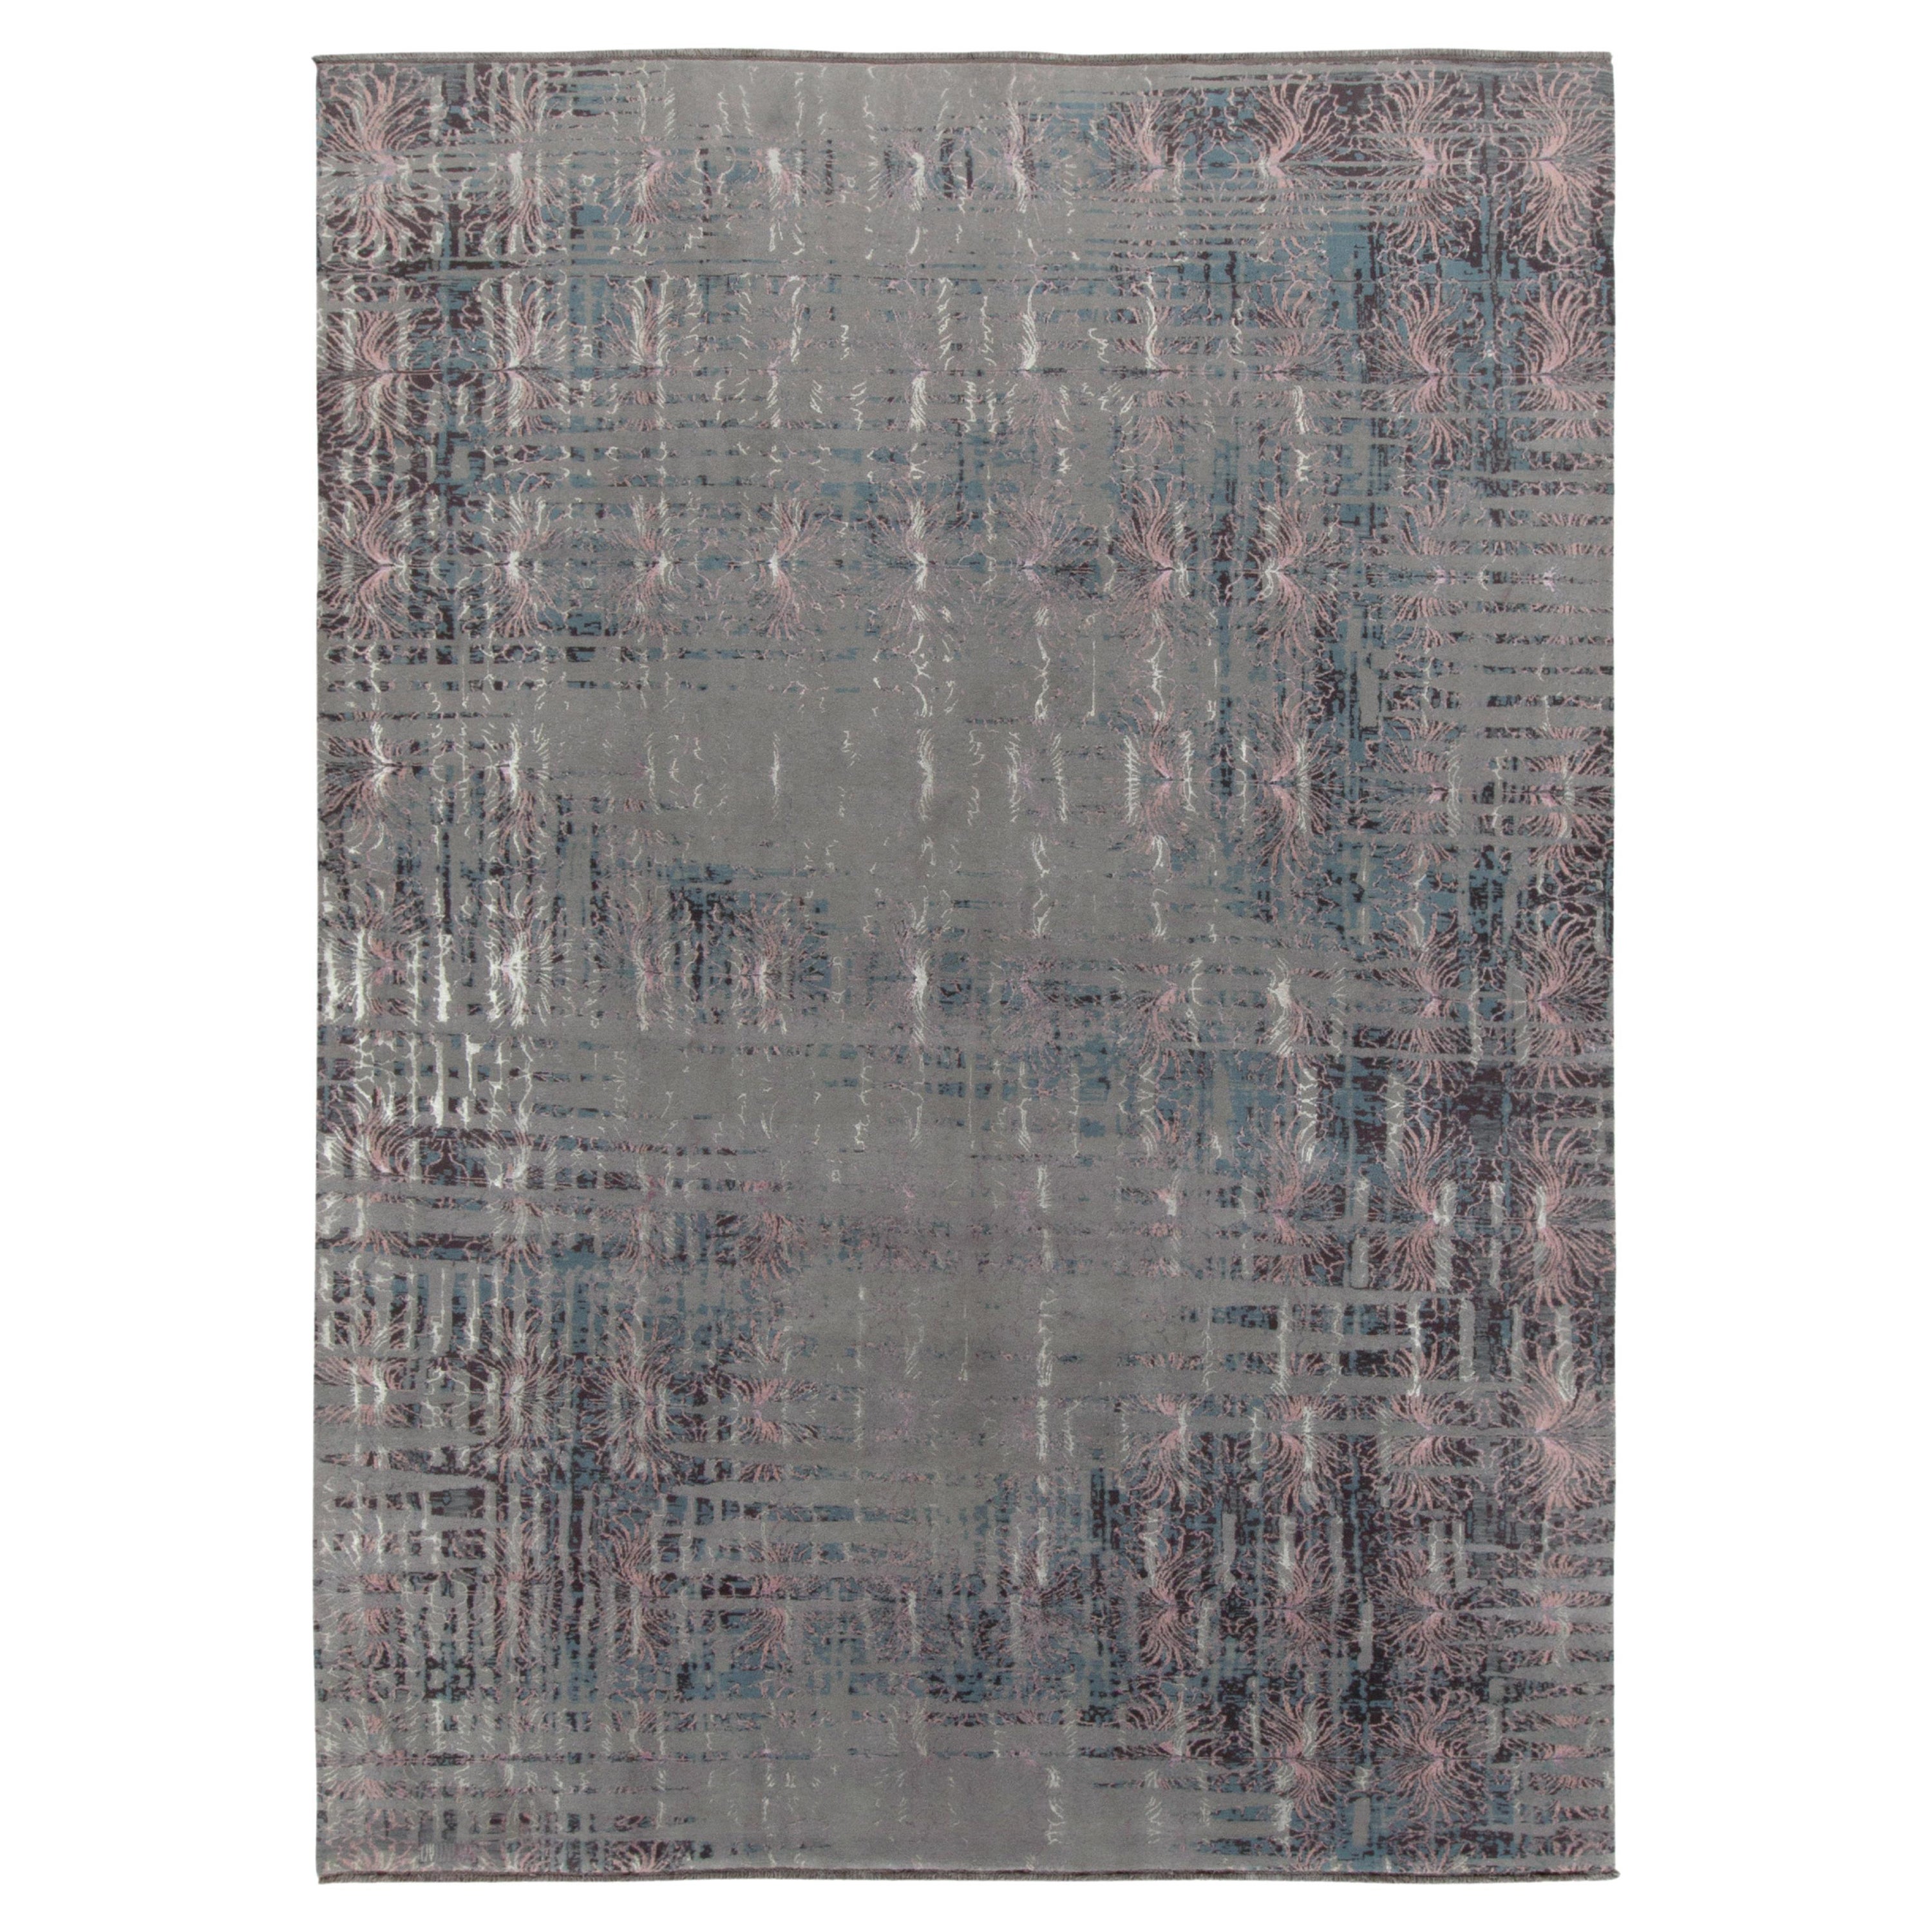 Rug & Kilim’s Abstract Rug in Blue and Grey, Subdued Pink Floral Patterns For Sale